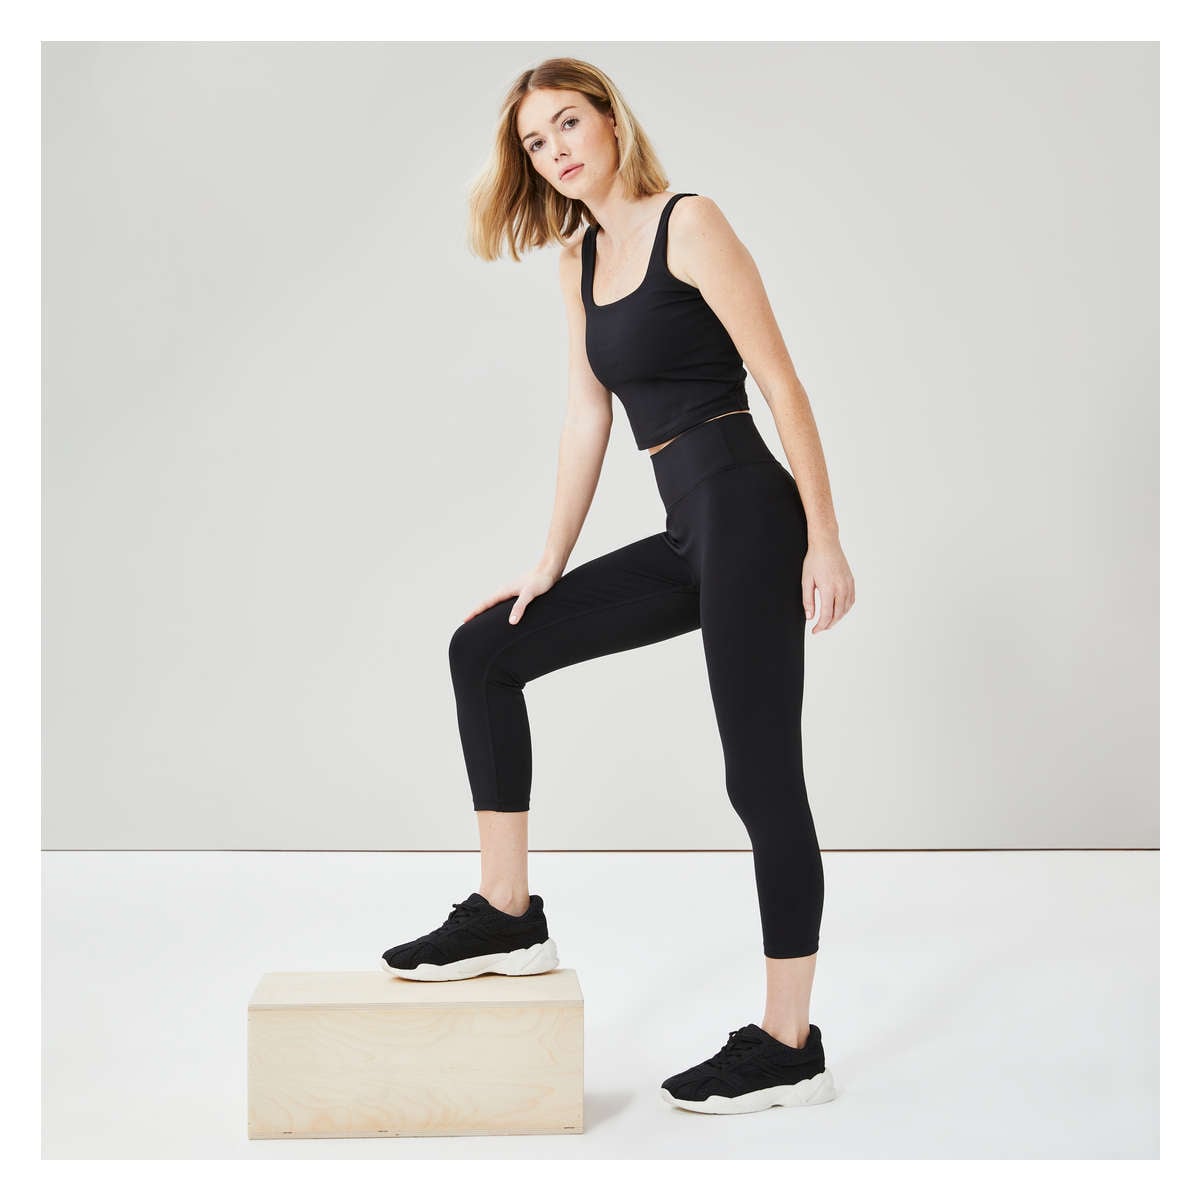 Womens Active Yoga Set With Bra, Bulift Pocket, And Leggings Sportswear Set  For Gym And Workout C161/C162 From Managuazi, $27.74